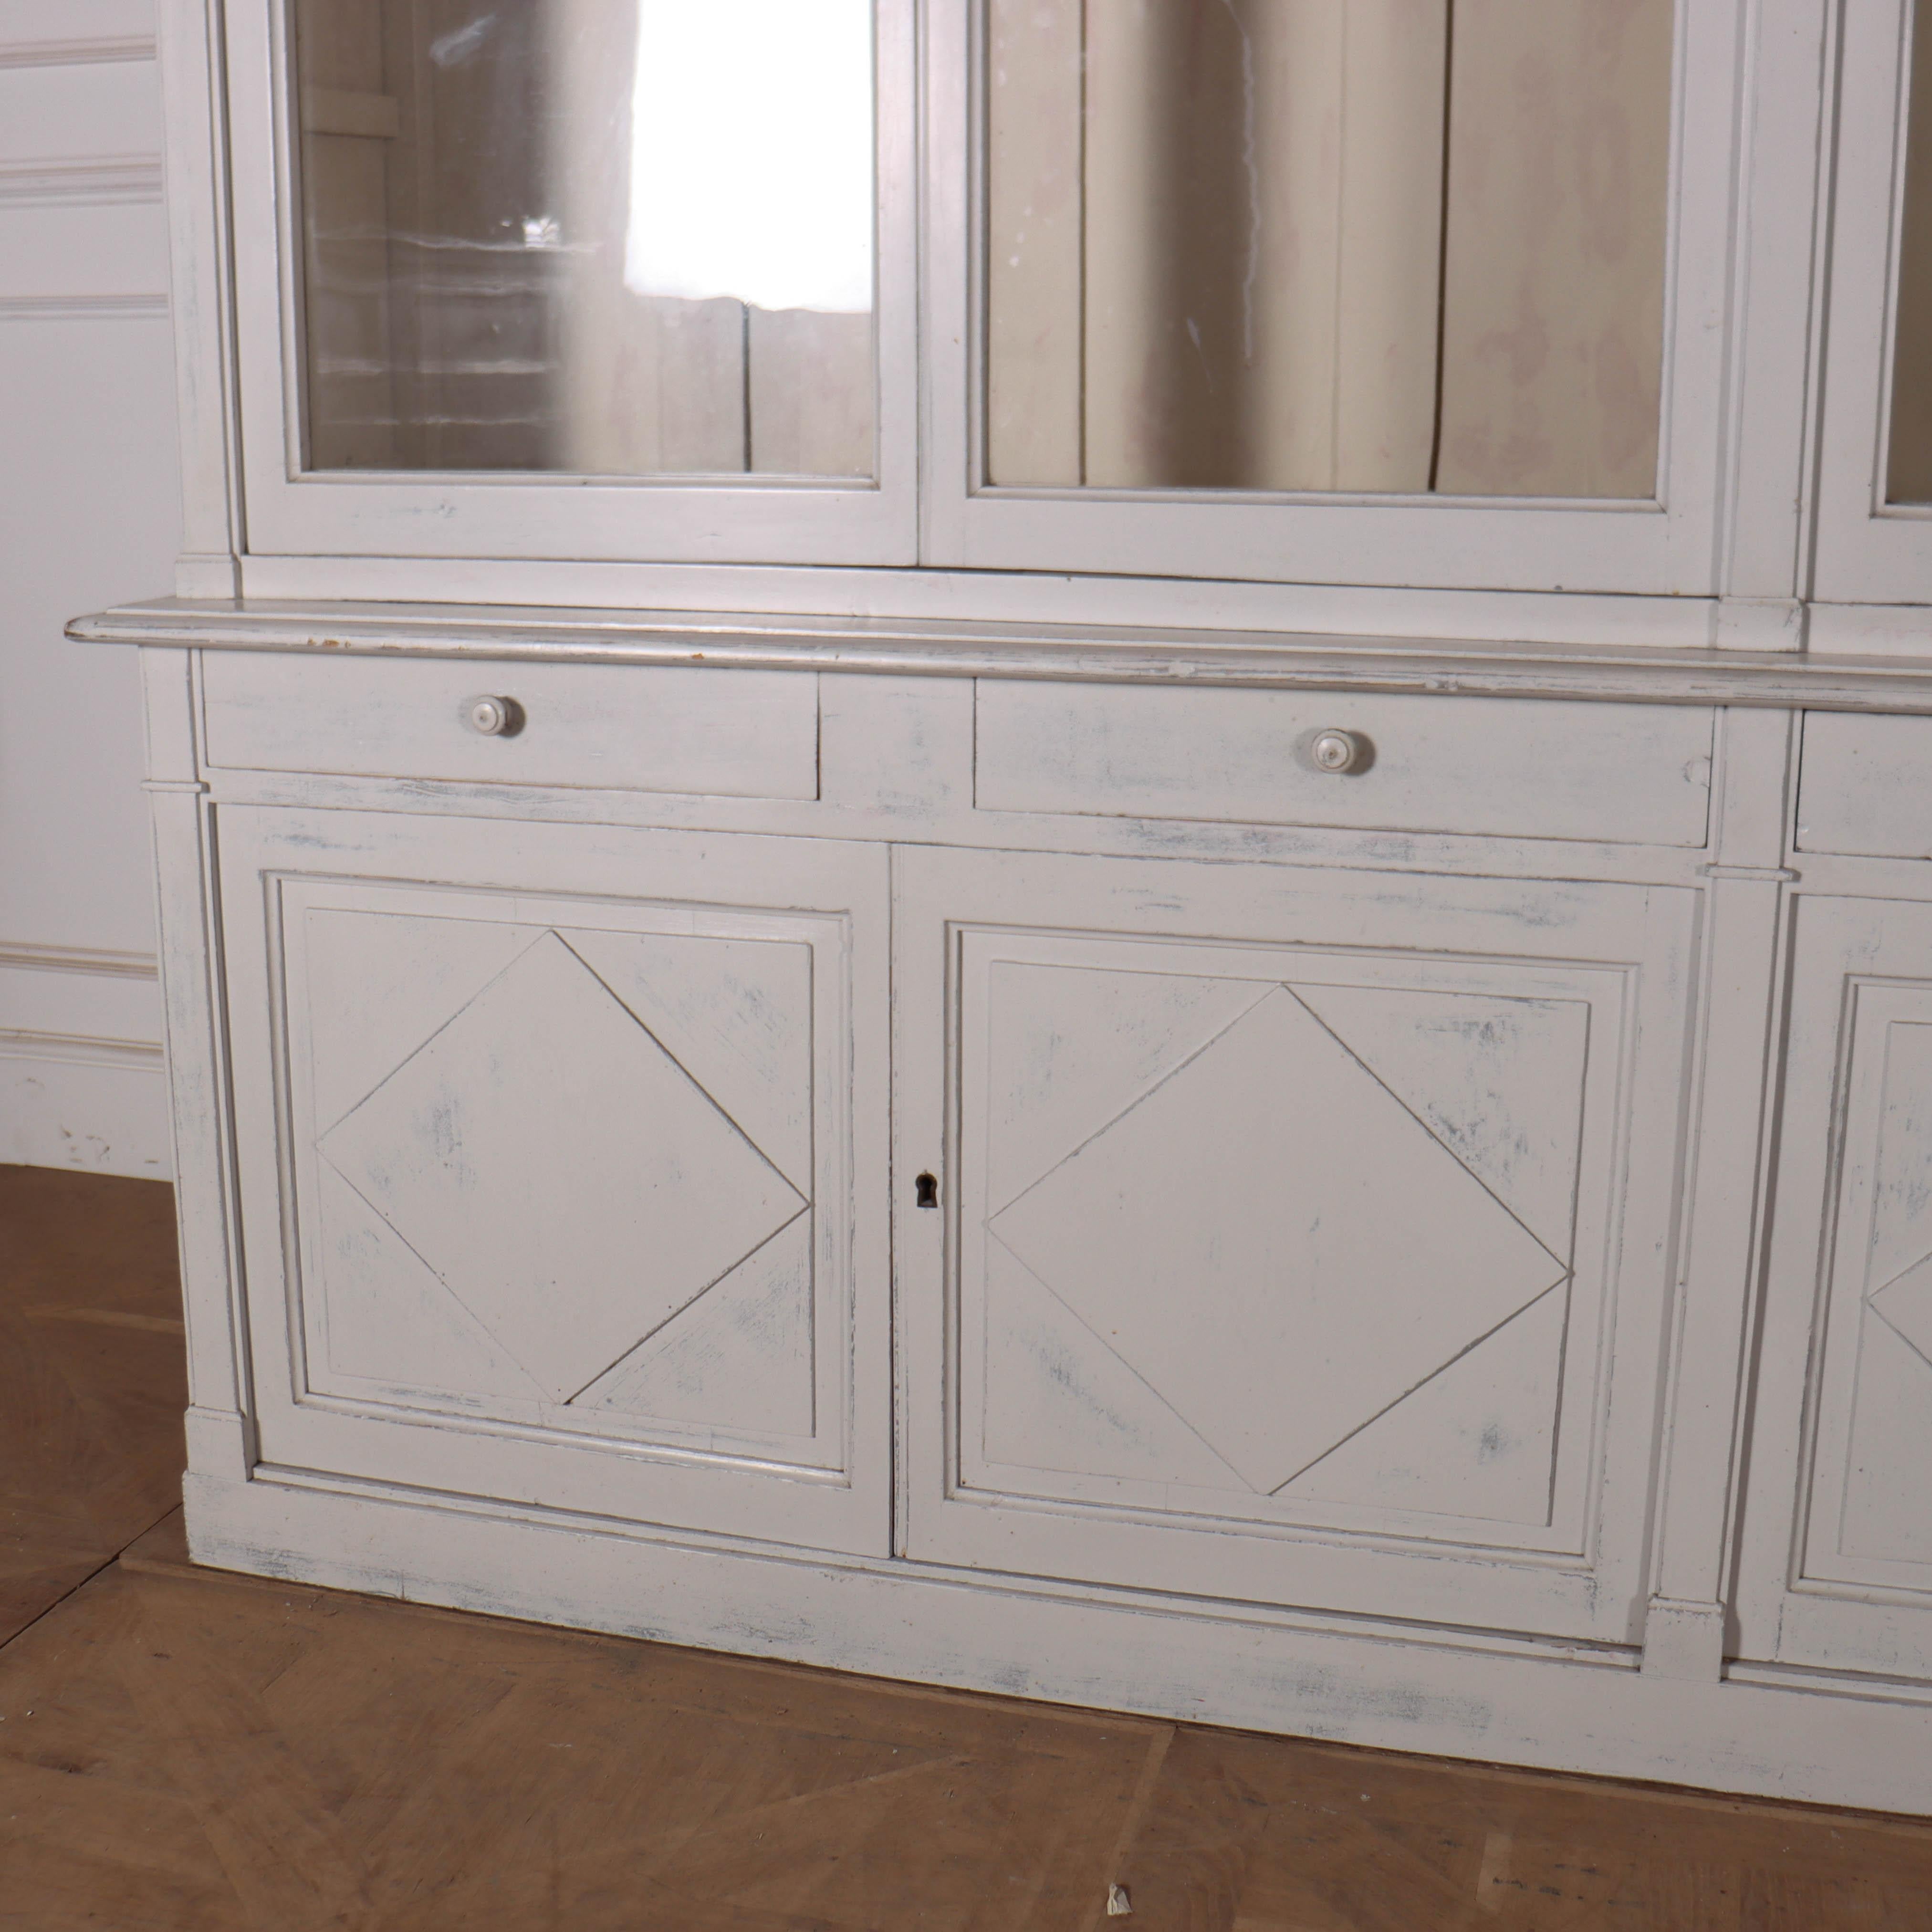 Large 19th C French painted pine kitchen cabinet / bookcase. 1860.

Awaiting extra shelves.

Reference: 7821

Dimensions
101 inches (257 cms) wide
20 inches (51 cms) deep
94.5 inches (240 cms) high.